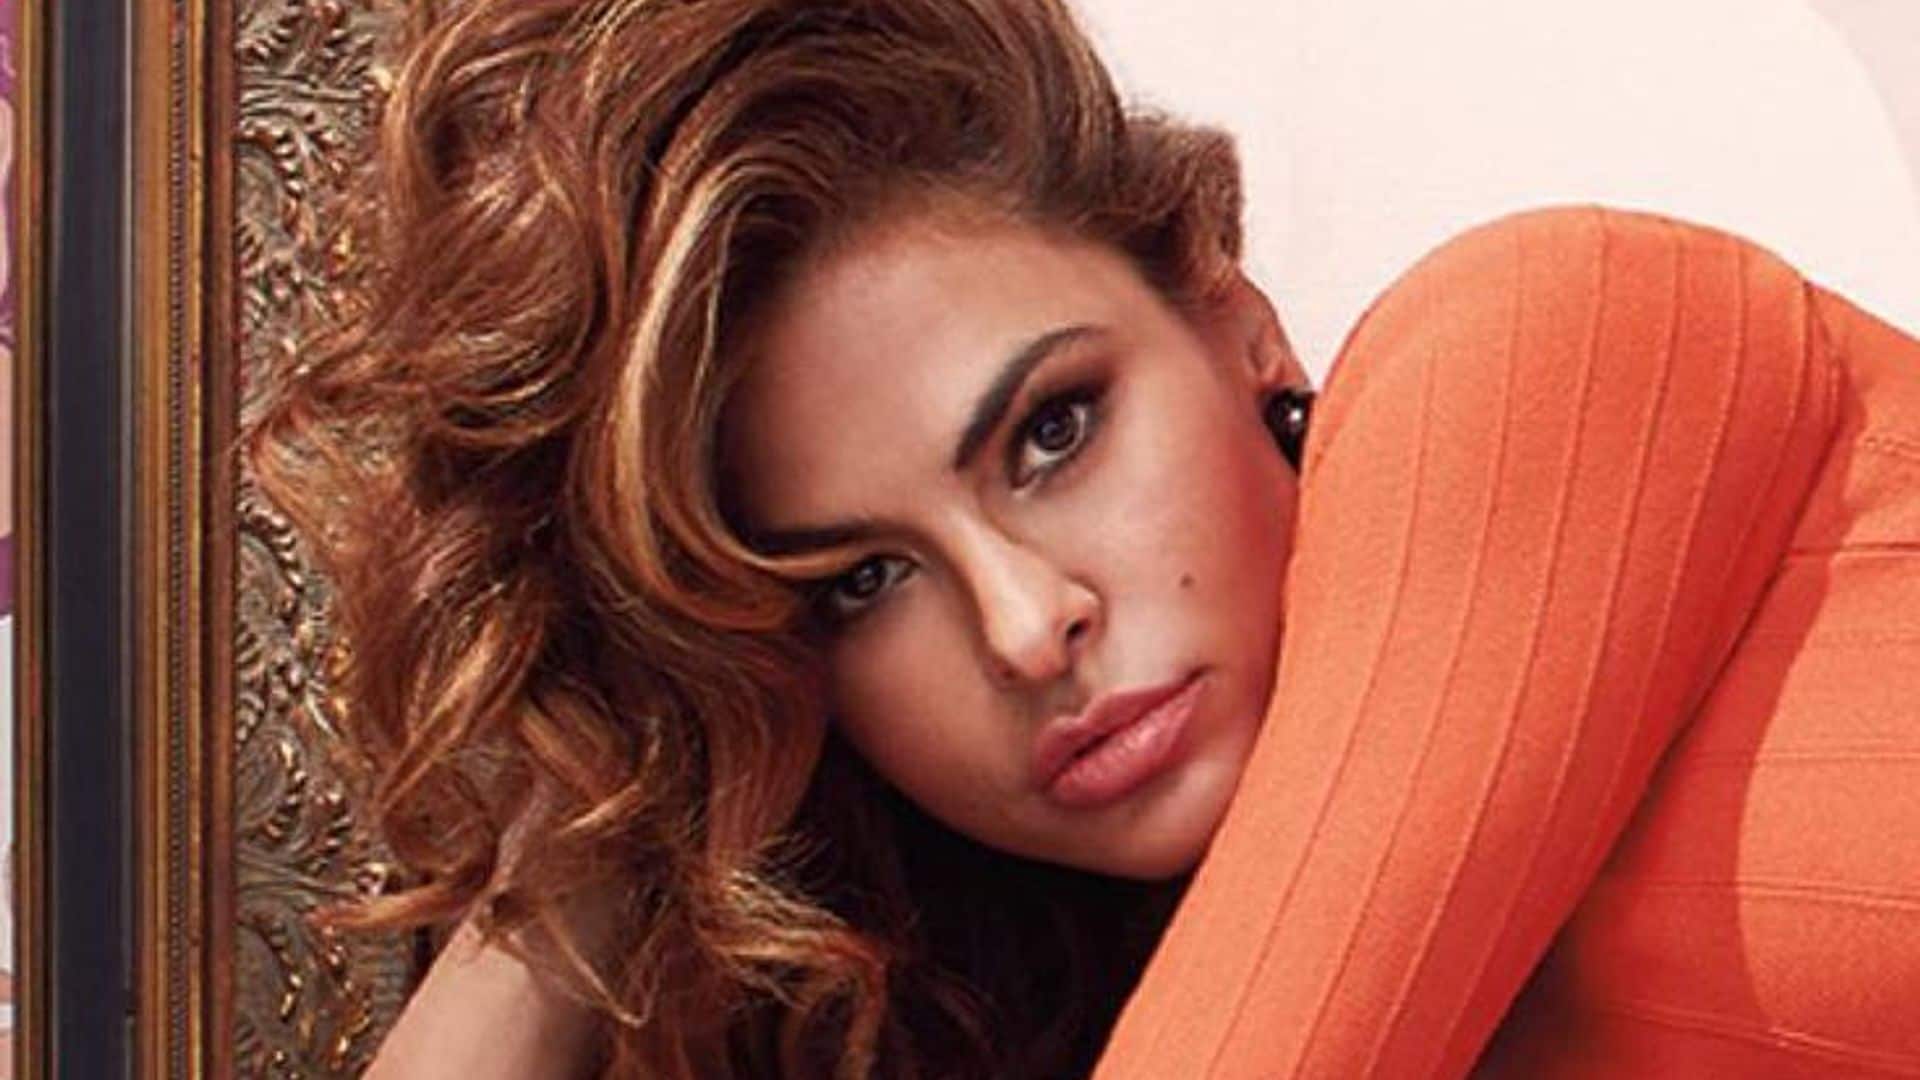 Eva Mendes reveals she was hypnotized and it changed her life